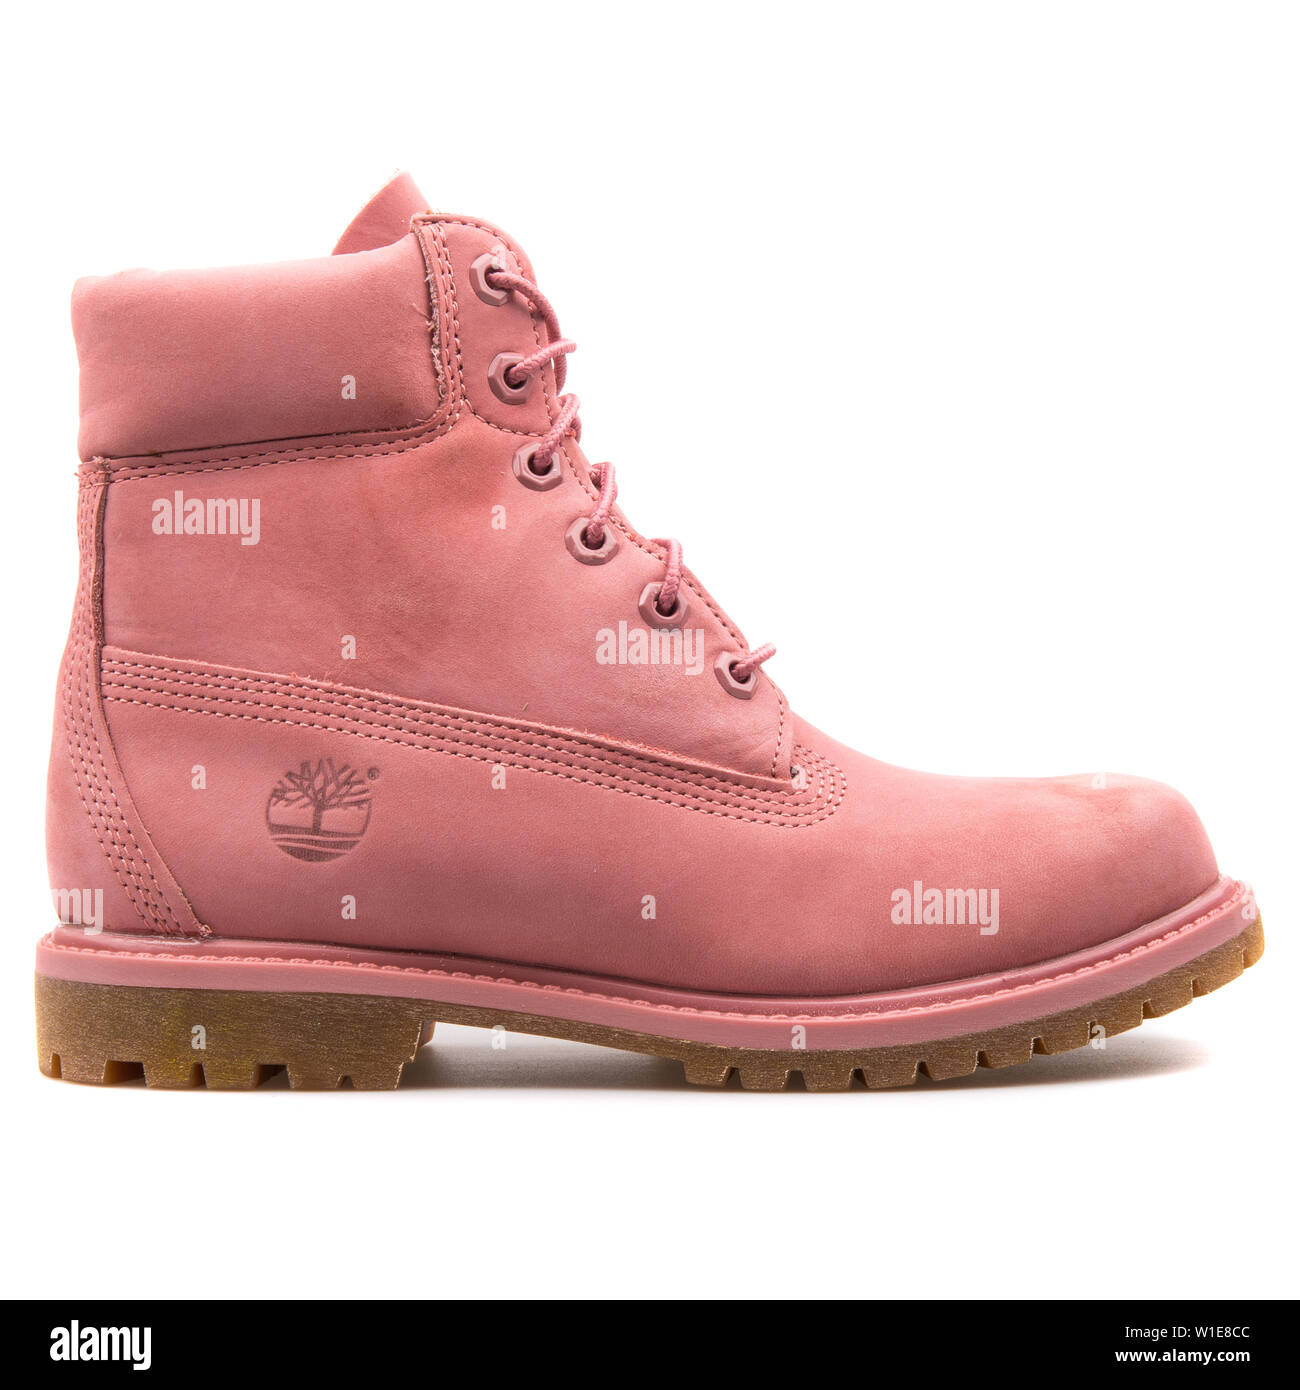 VIENNA, AUSTRIA - AUGUST 25, 2017: Timberland AF 6in Premium Dusty Rose  boot on white background Stock Photo - Alamy